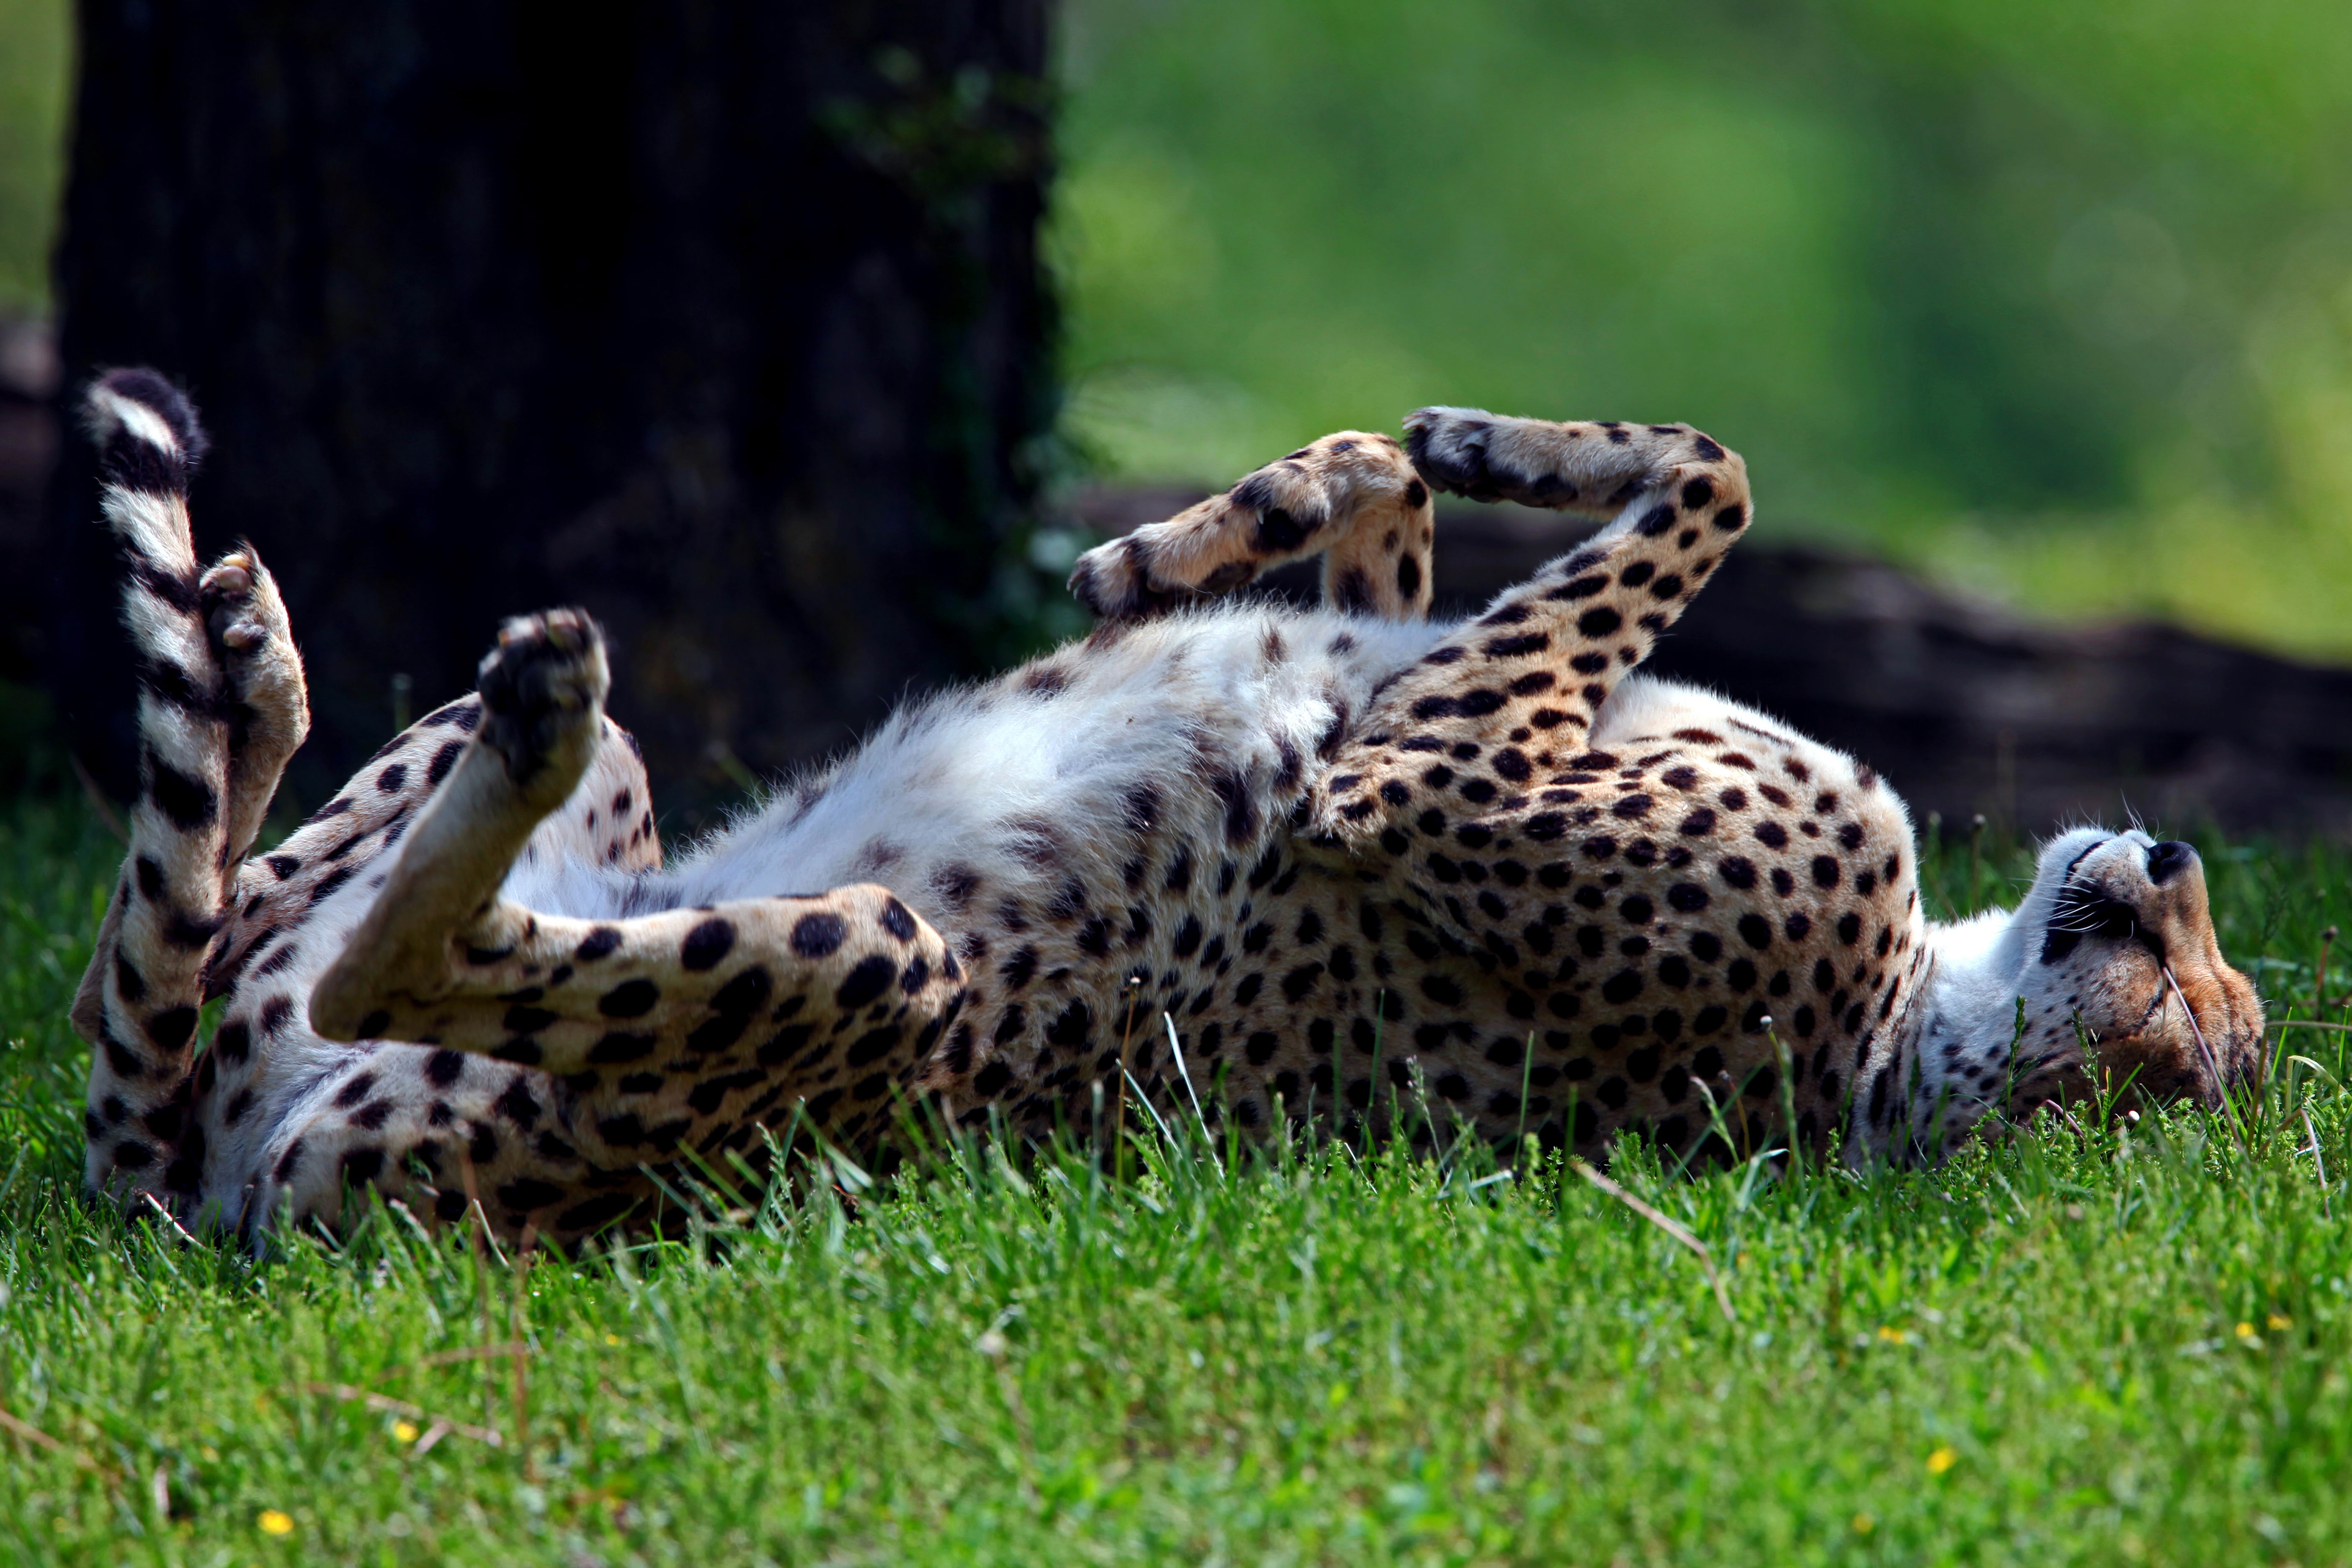 cheetah, tumble, to lie down, somersault HD Wallpaper for Phone